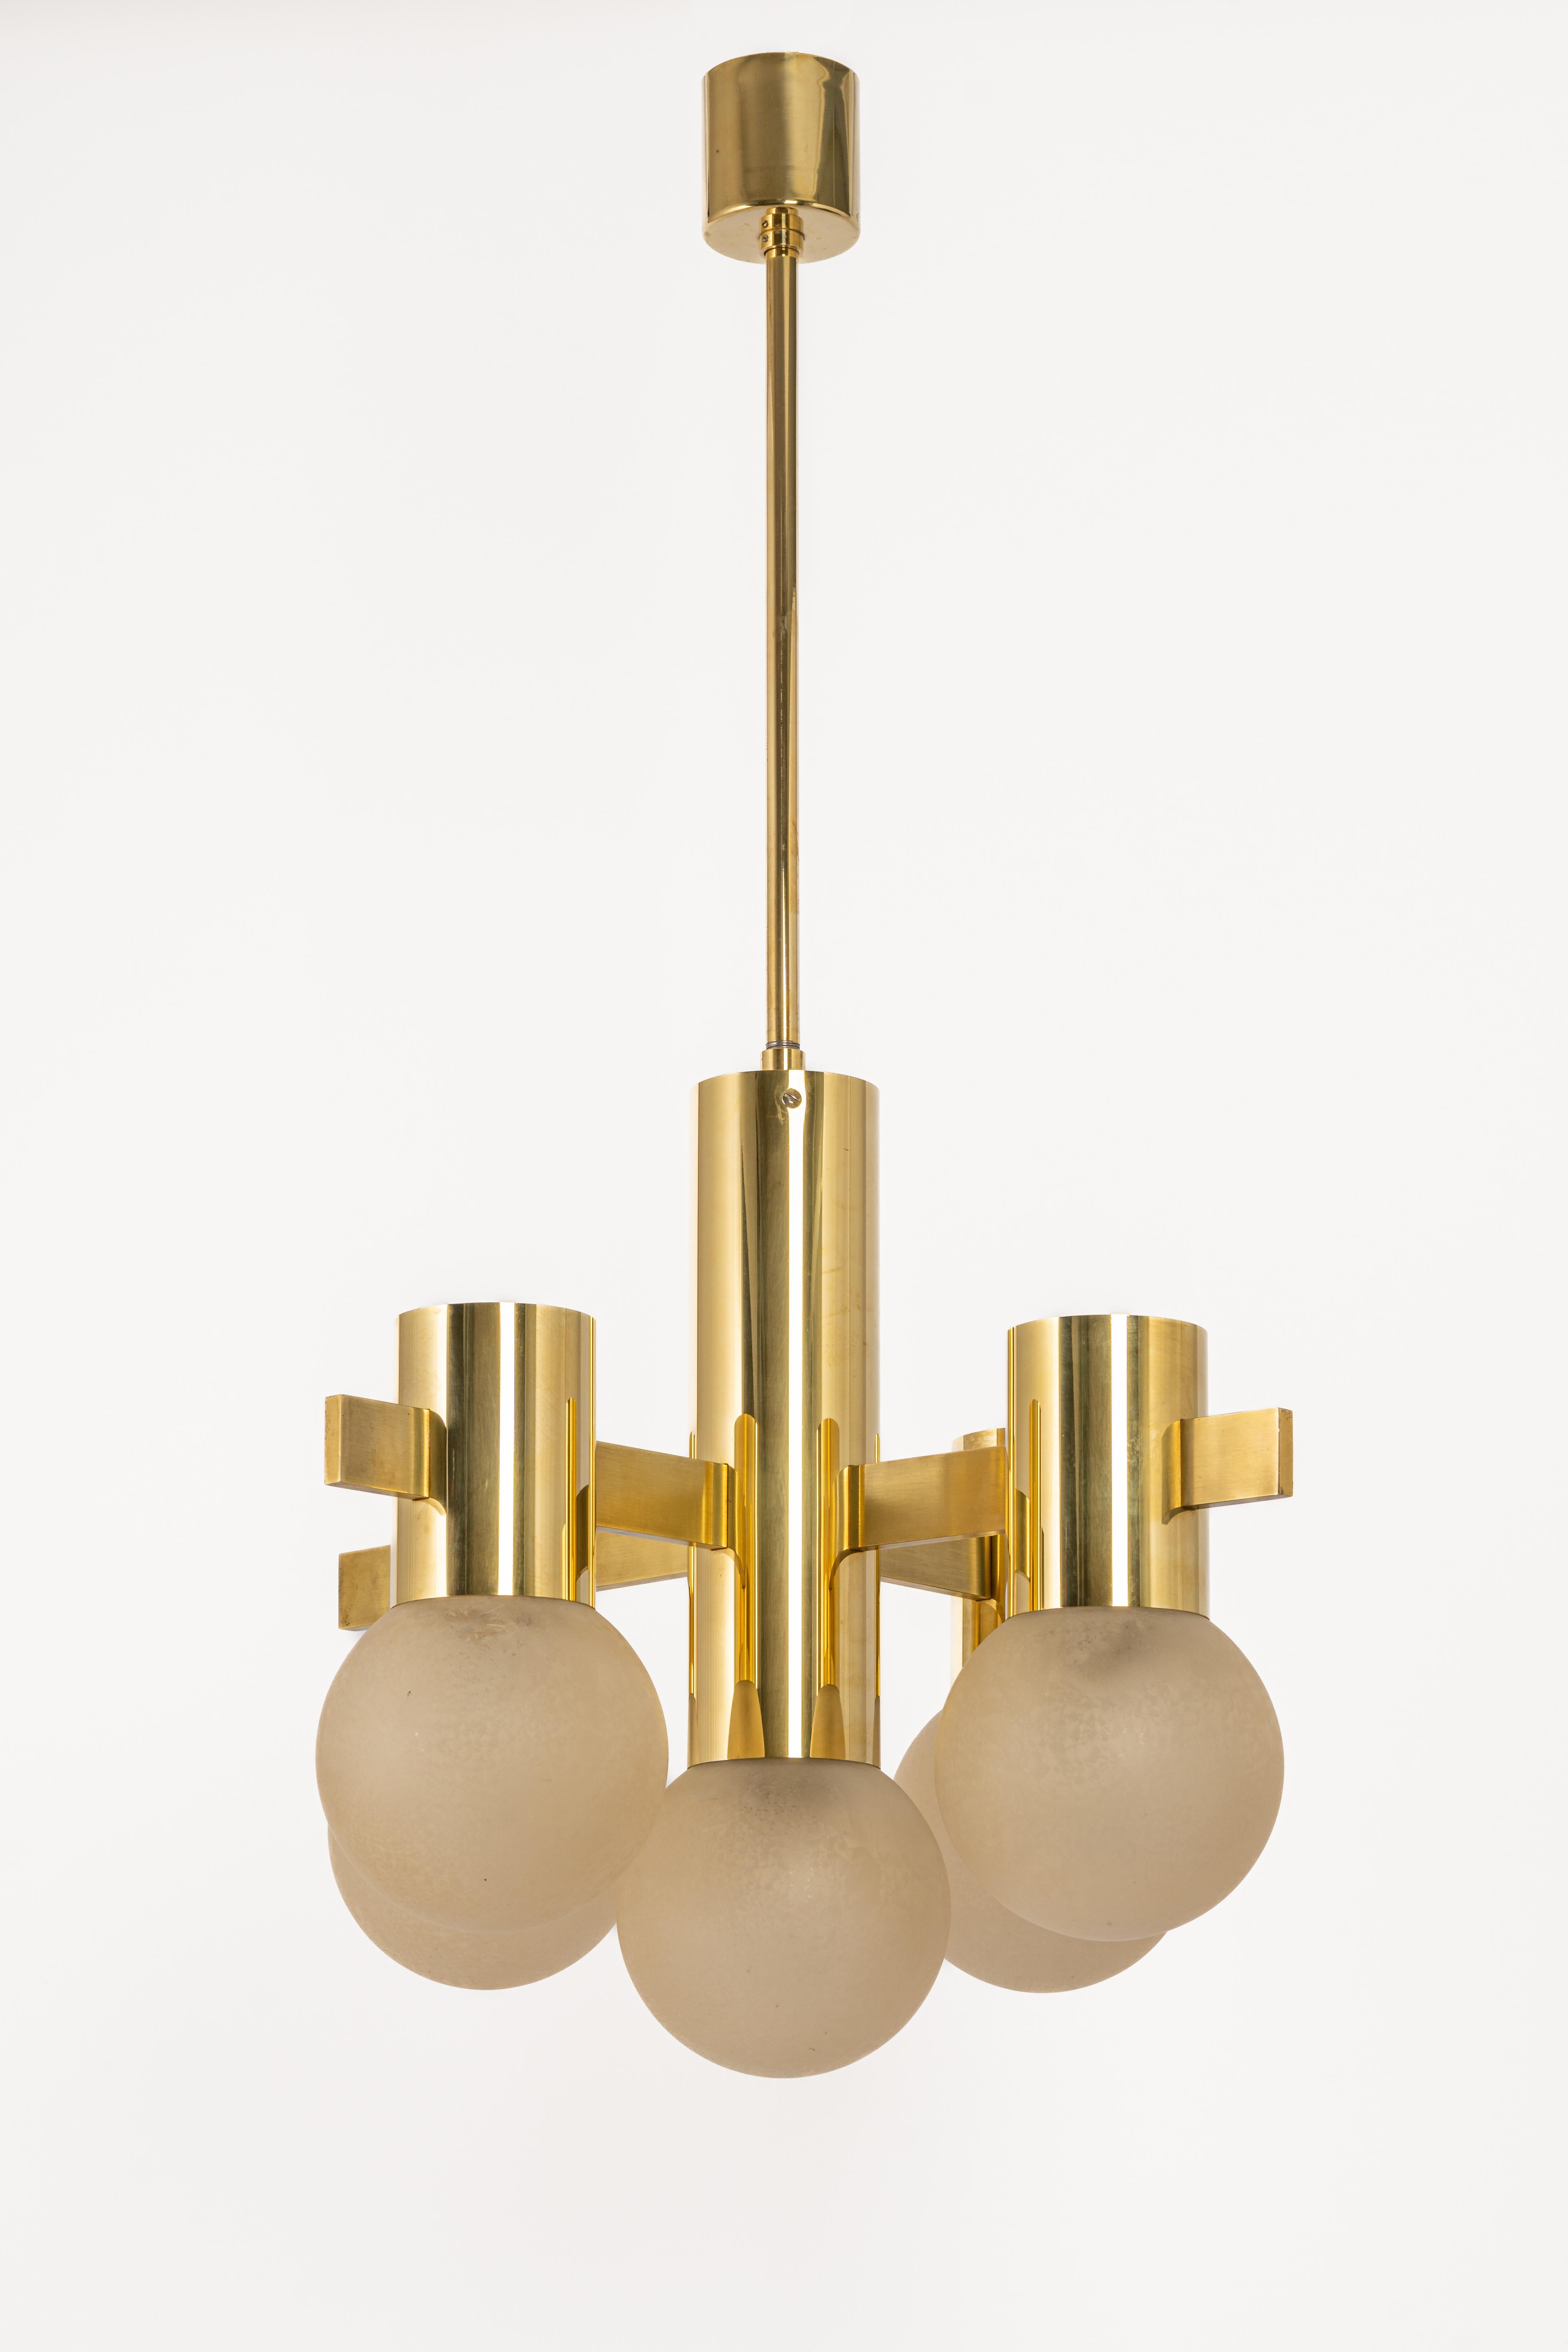 Five-light brass chandelier in the style of Sciolari.
frosted glass in a very beautiful color.
Made with brass, best of the 1960s.

High quality and in very good condition. Cleaned, well-wired and ready to use. 

The fixture requires 5 x E14